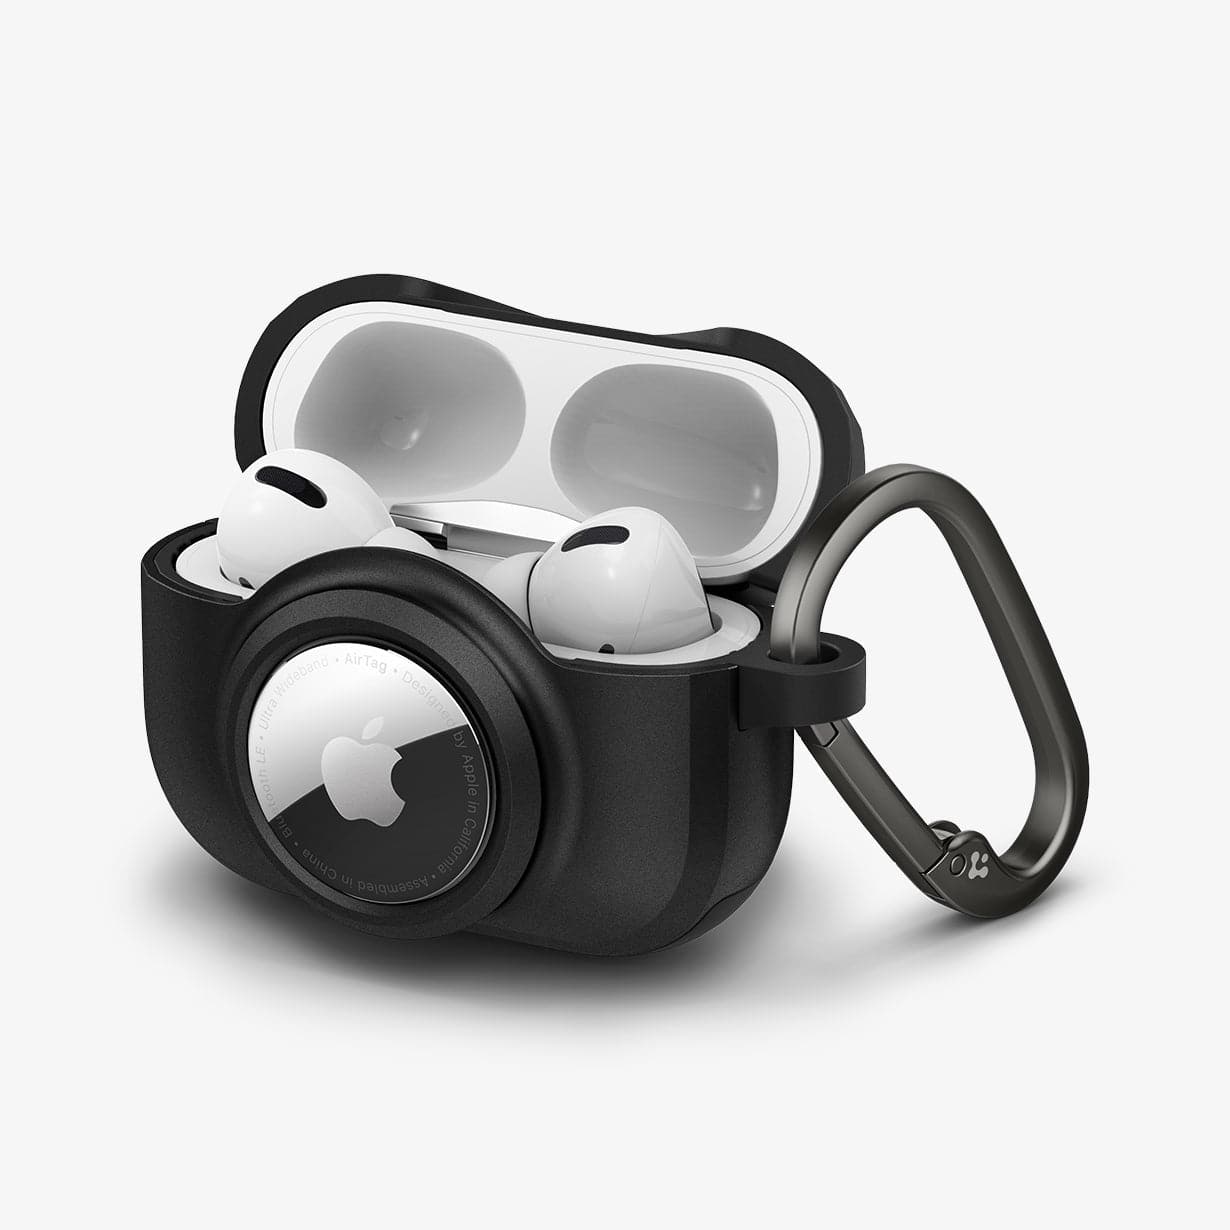 ACS03167 - Apple AirPods Pro Case Tag Armor Duo in black showing the front, side, carabiner and top open with AirPods inside